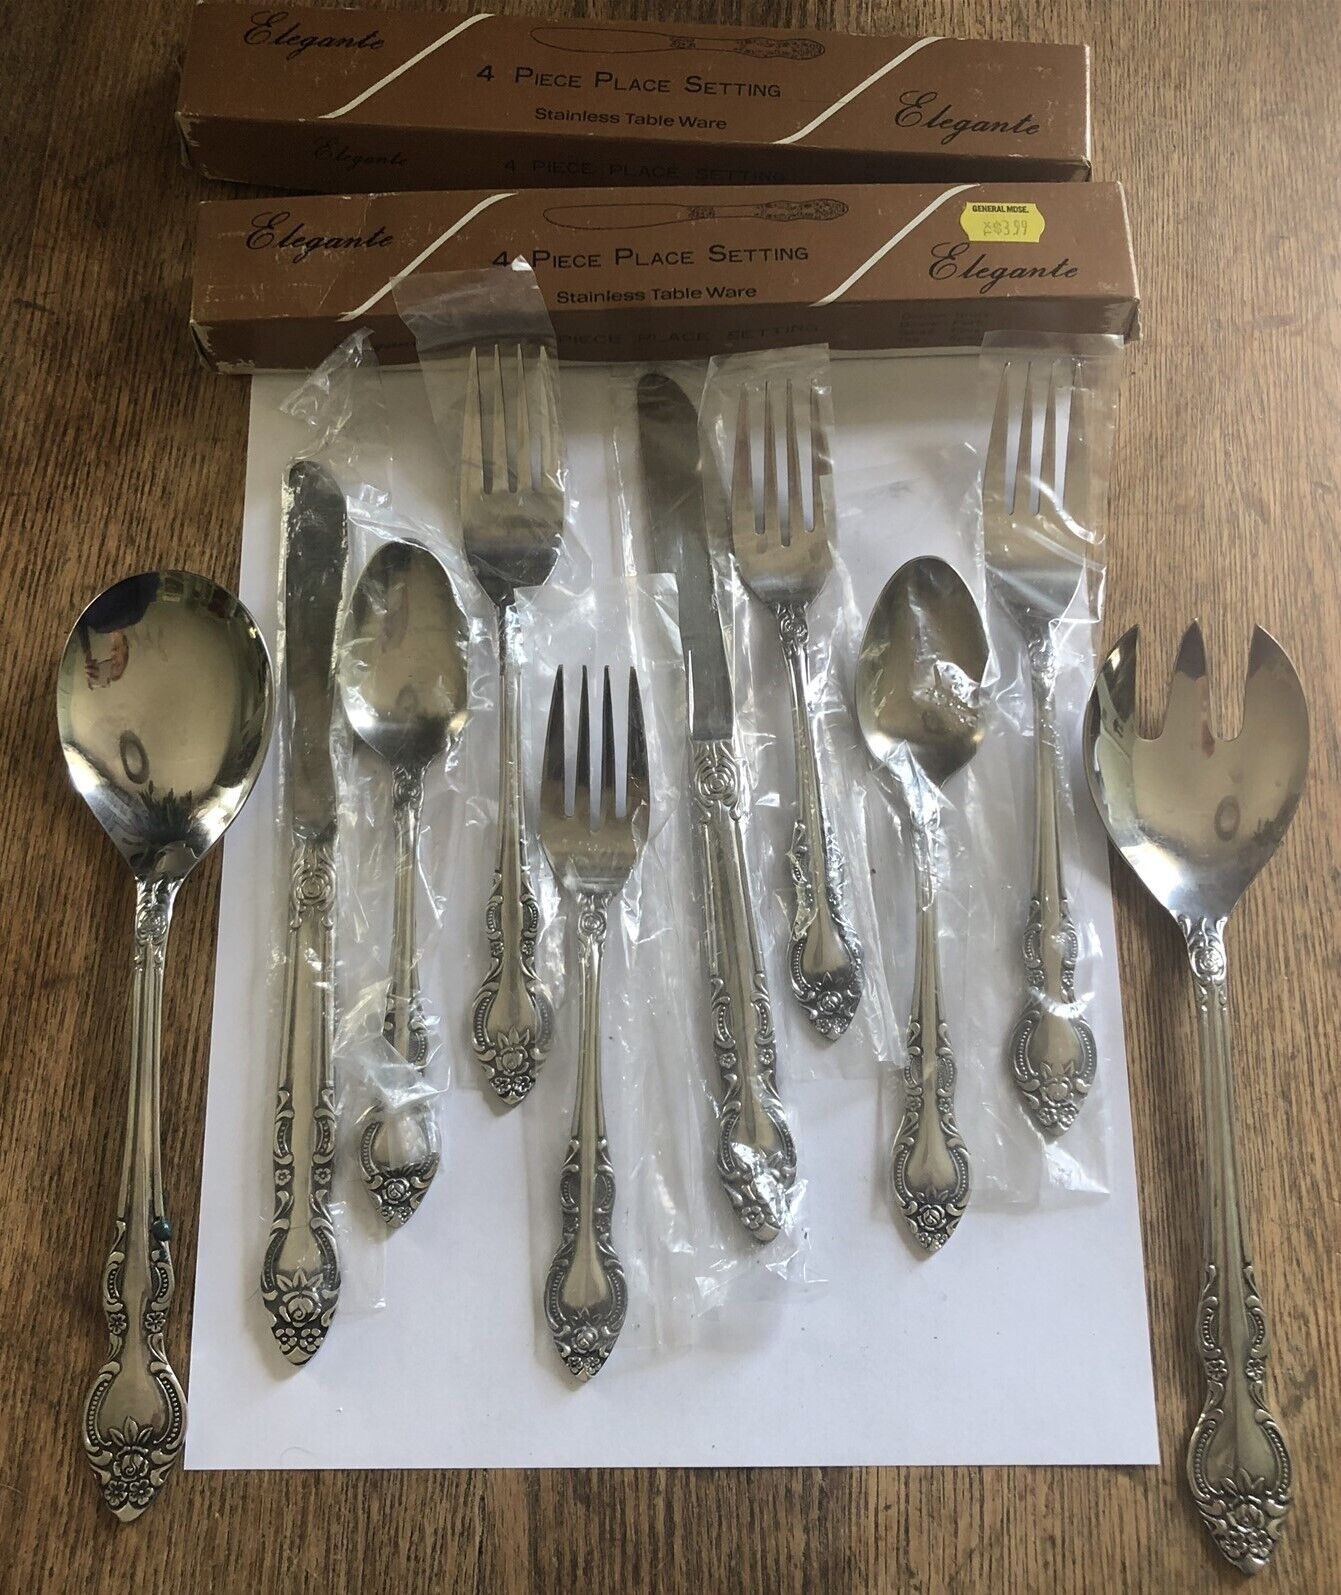 Vintage Elegante Japan Stainless Flatware Place Settings and Serving Spoons 2